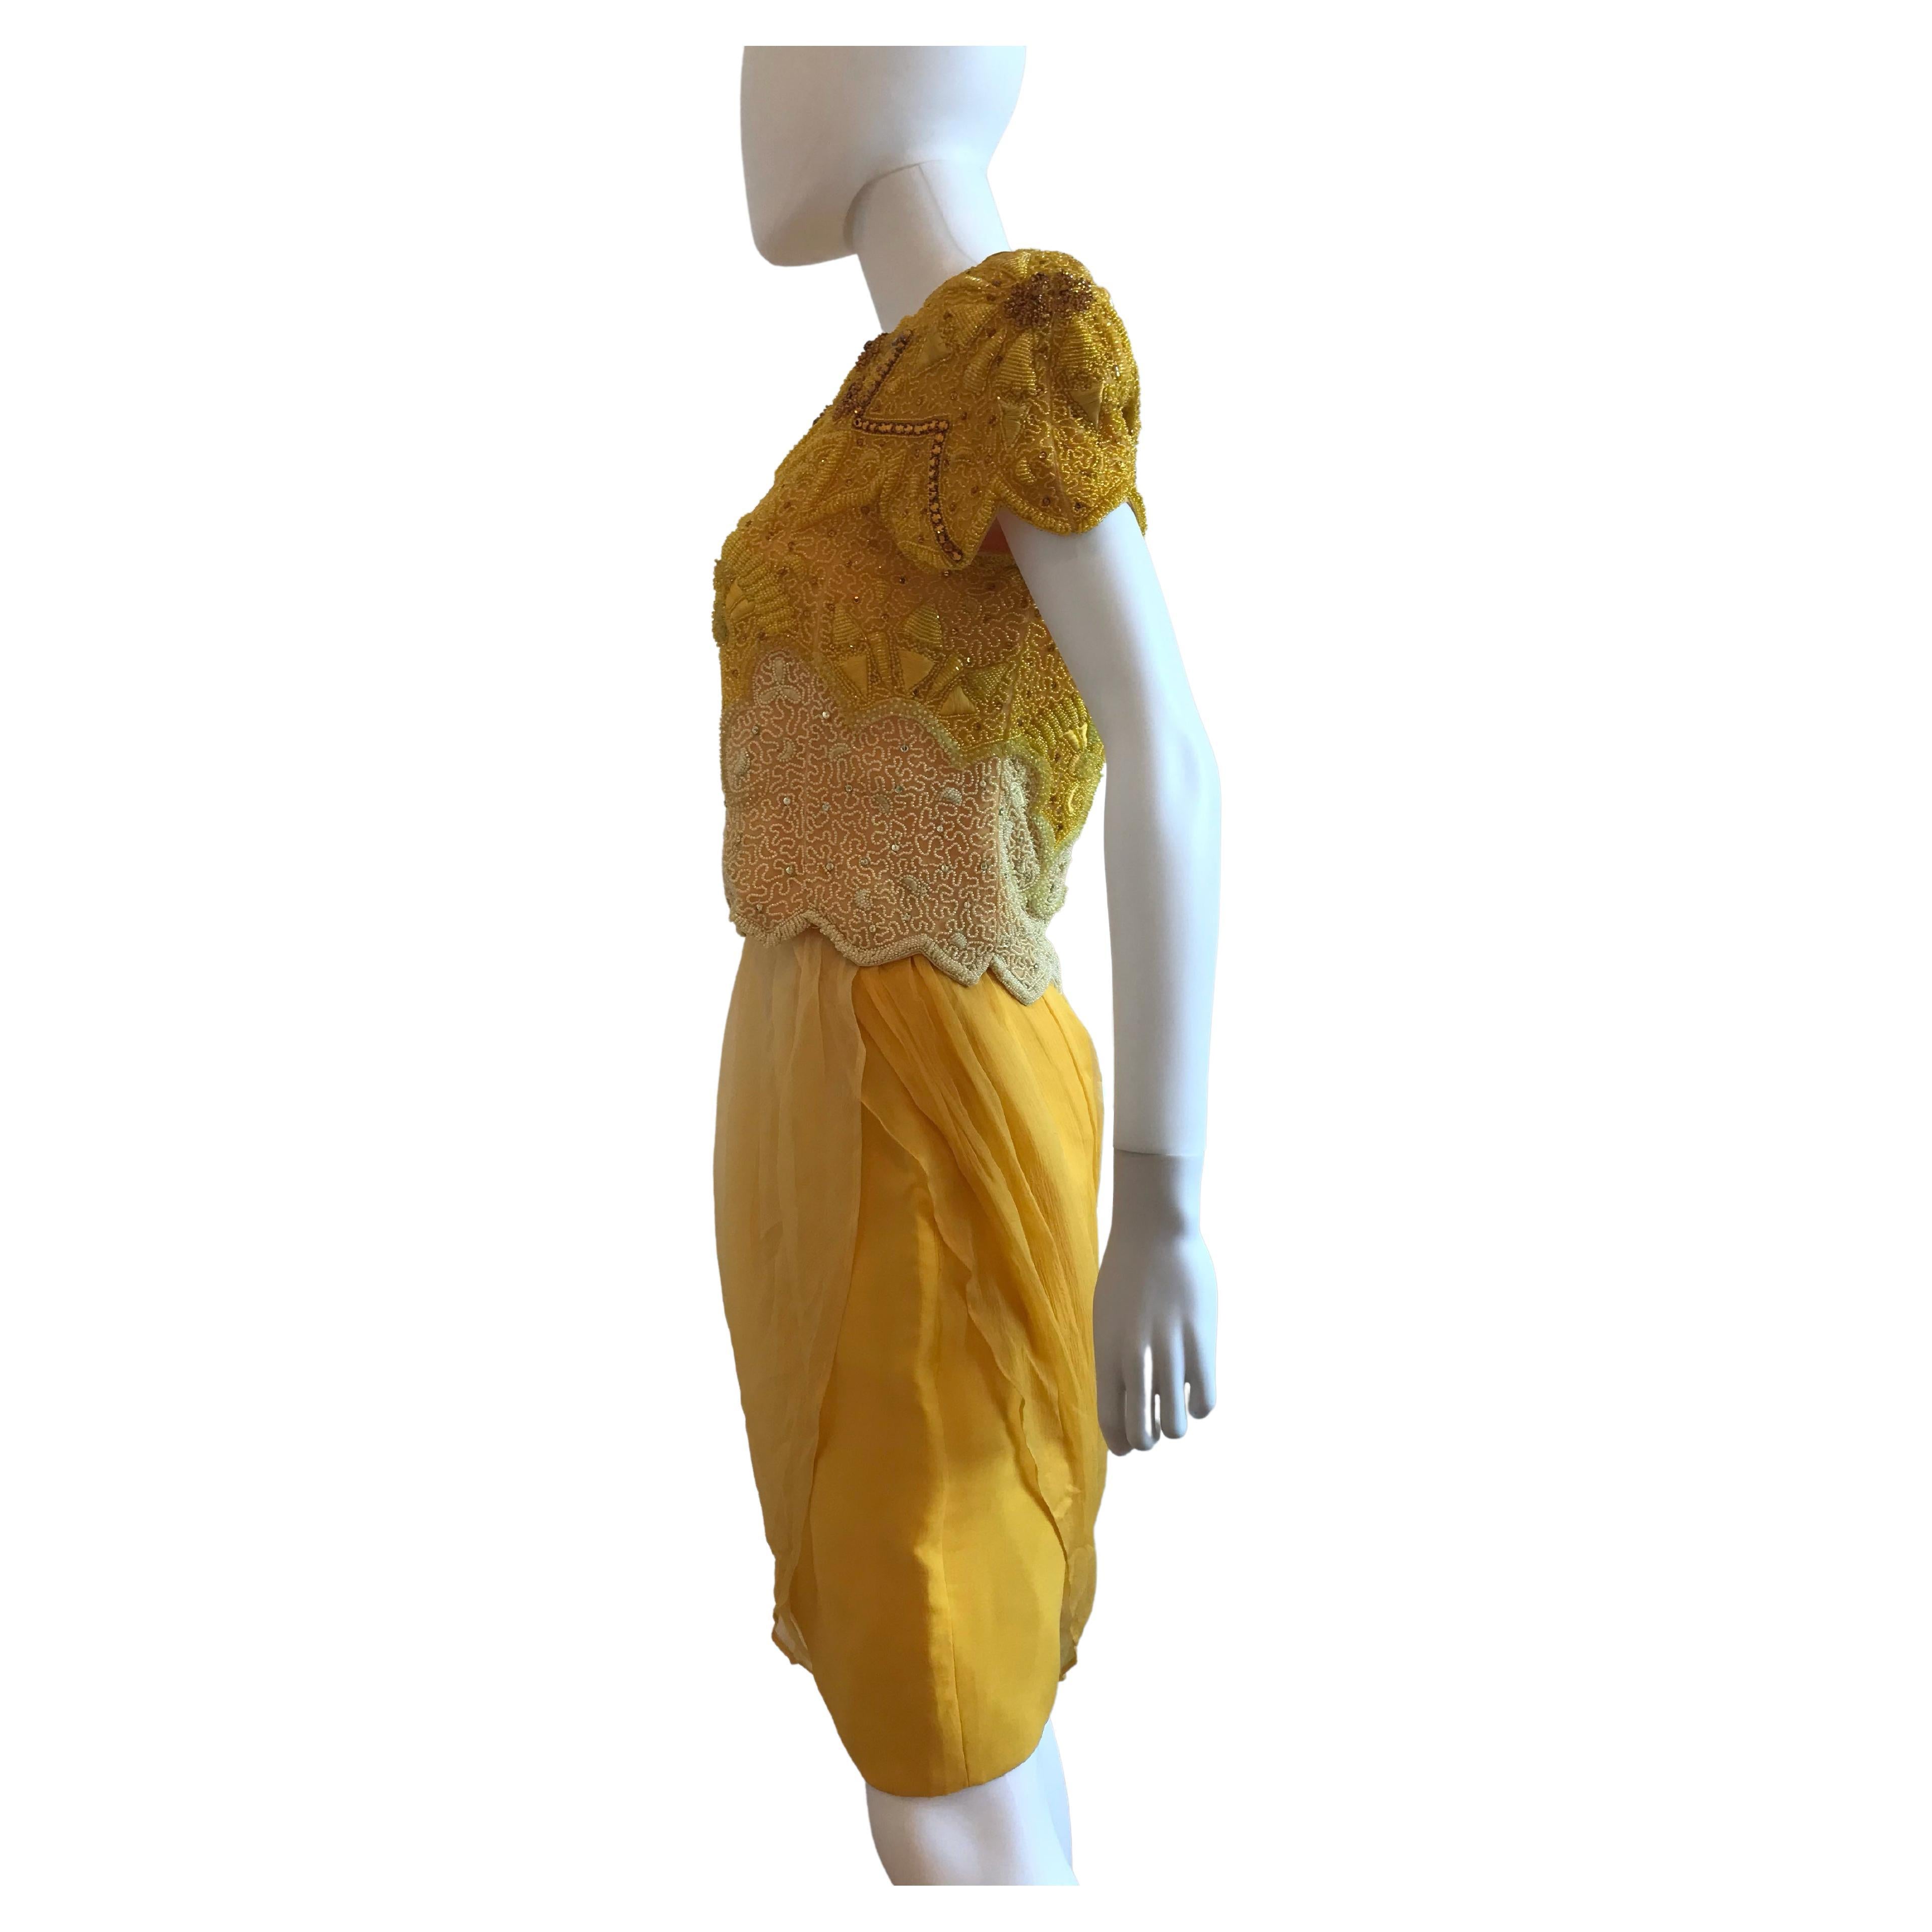 Gianni Versace for Genny Yellow Beaded Jacket and Chiffon Skirt Ensemble For Sale